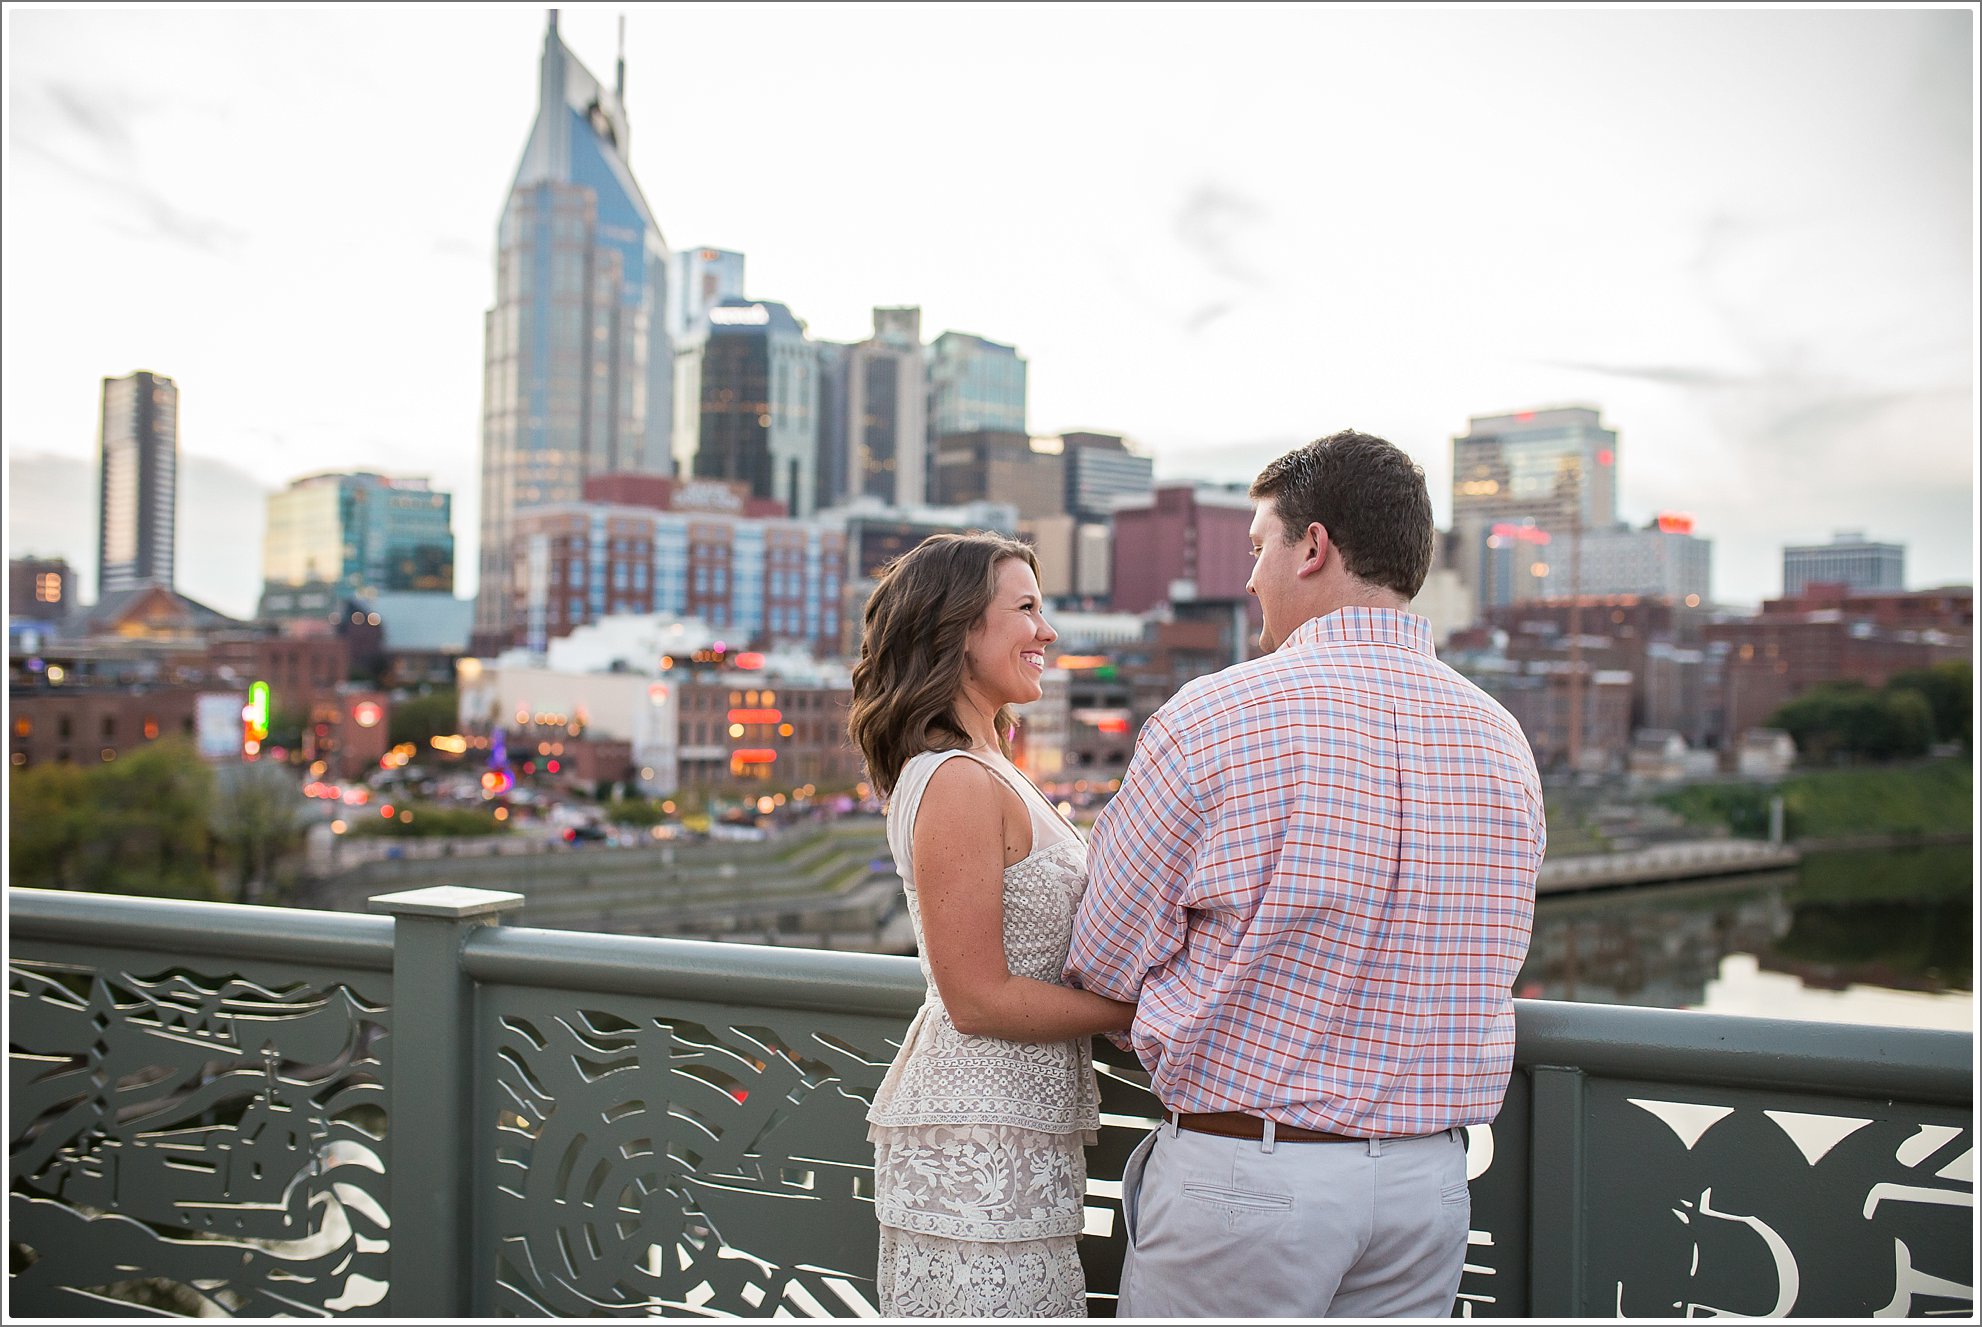 A beautiful engaged couple celebrate their love with an engagement session in Nashville on the pedestrian bridge at sunset with the city skyline lit up in the background.